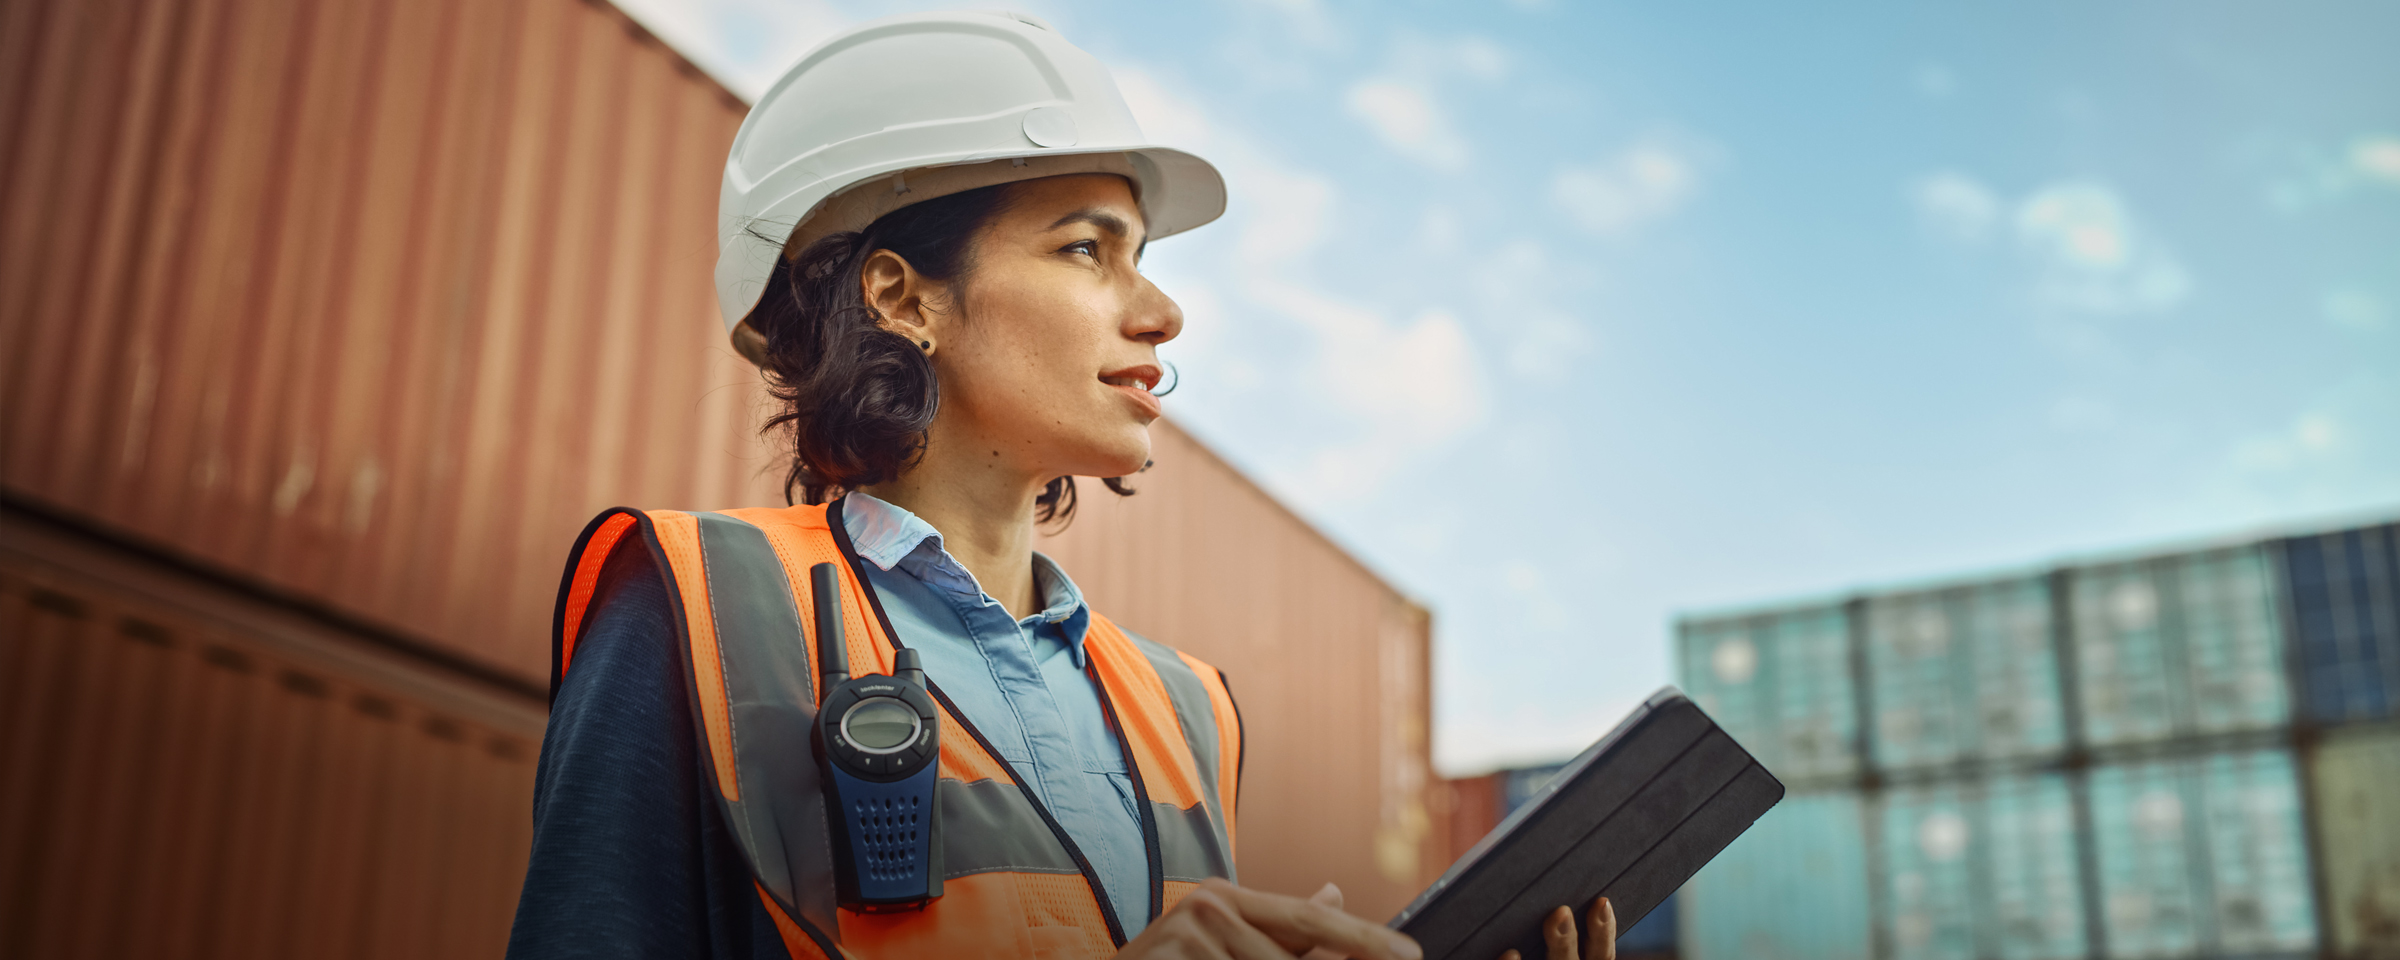 Woman with a hard hat, safety vest and tablet